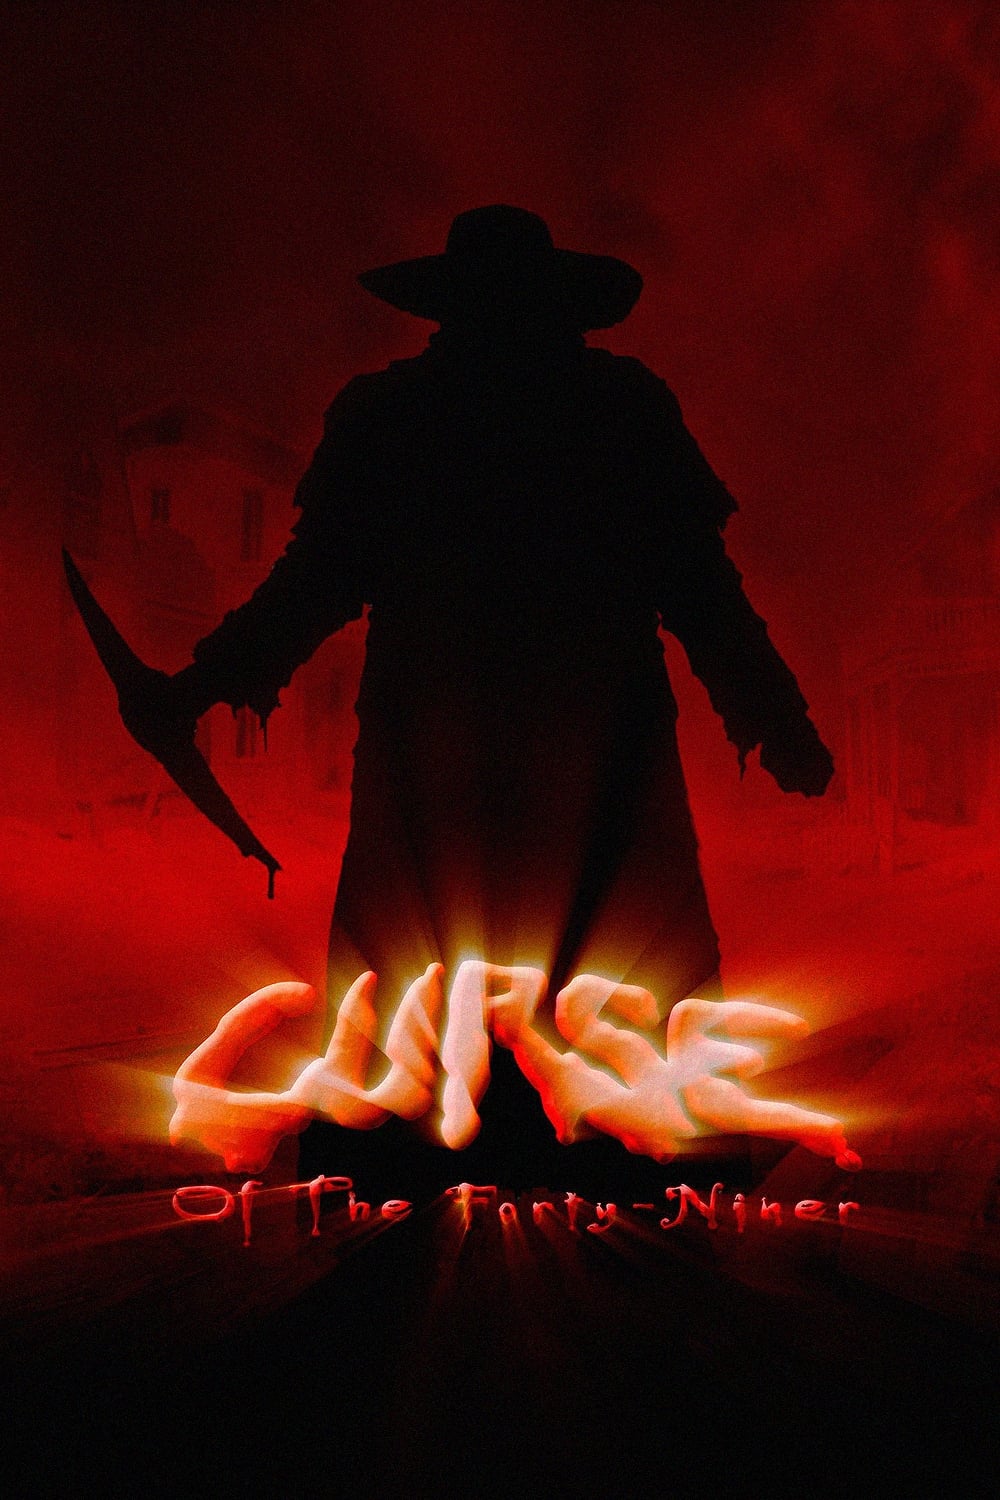 Curse of the Forty-Niner - Die Rache des Jeremiah Stone (2002)